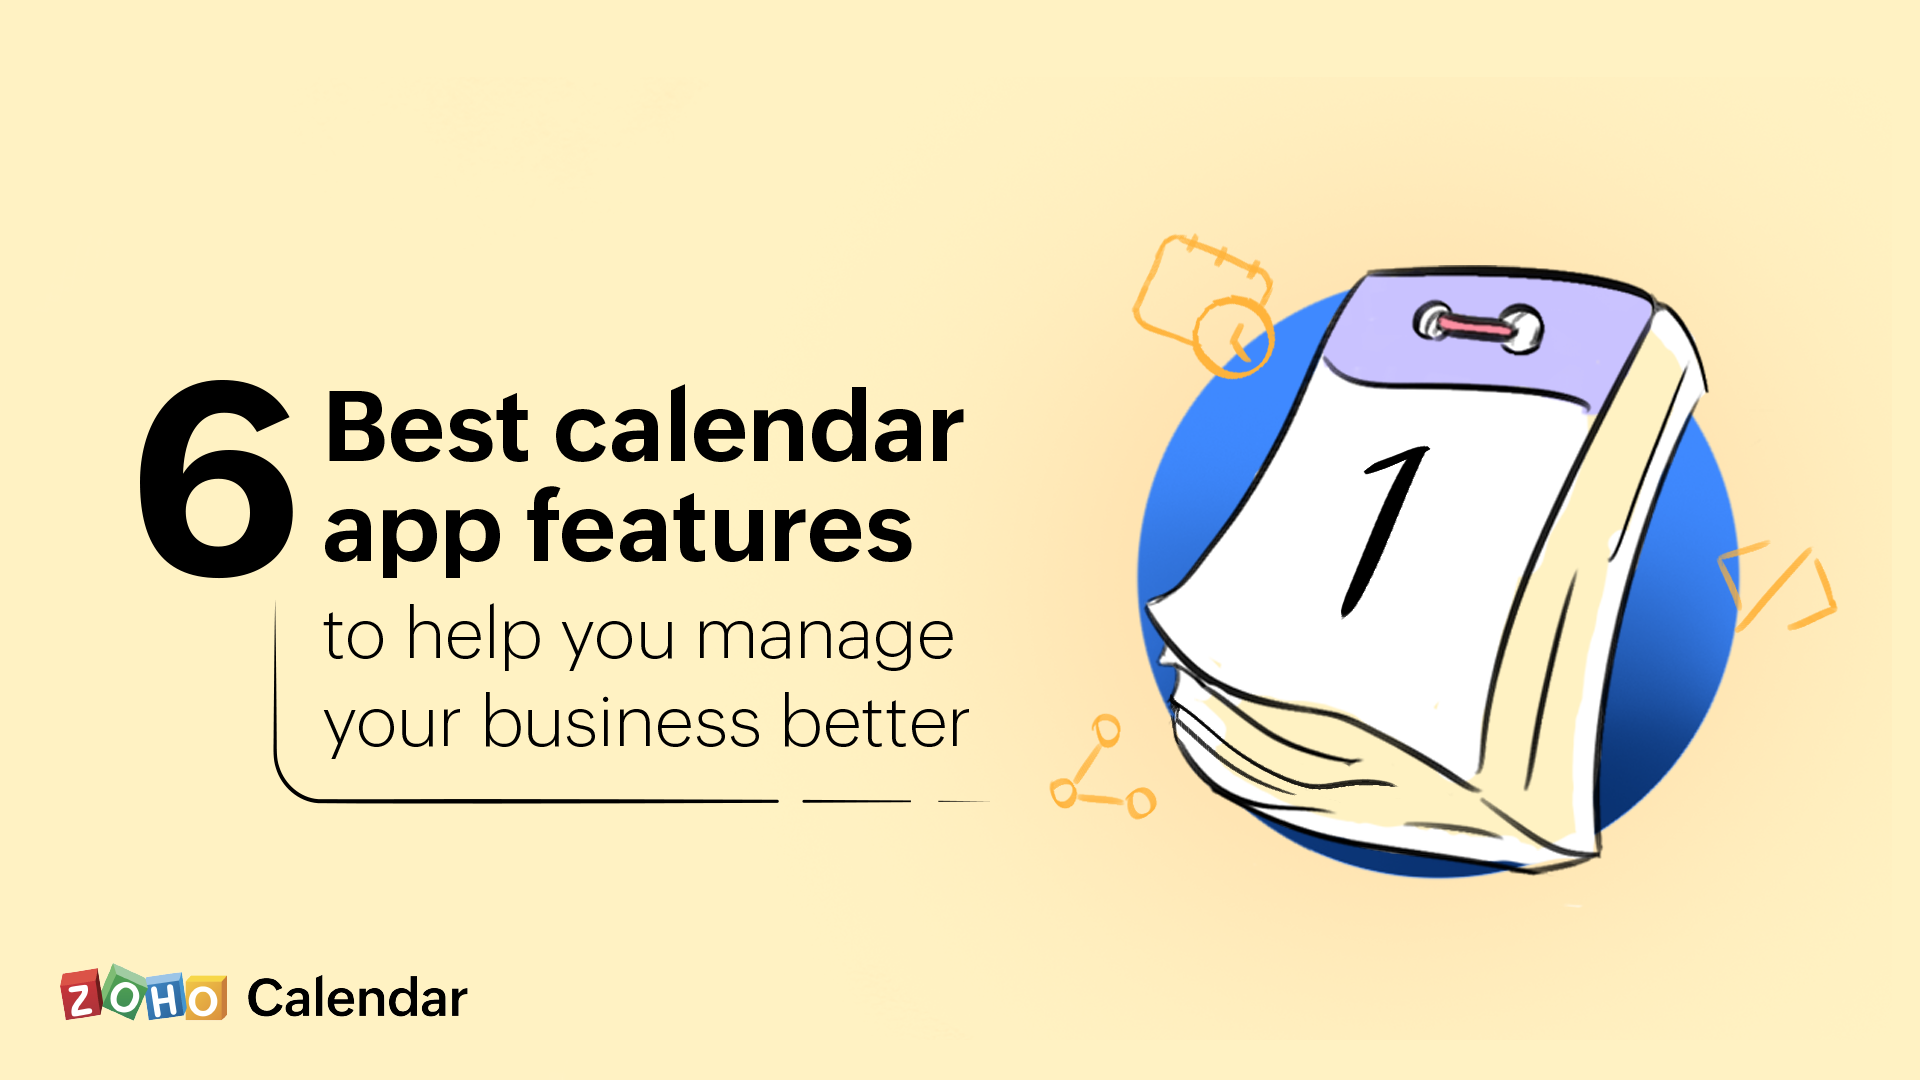 6 Best calendar app features to help you manage your business better